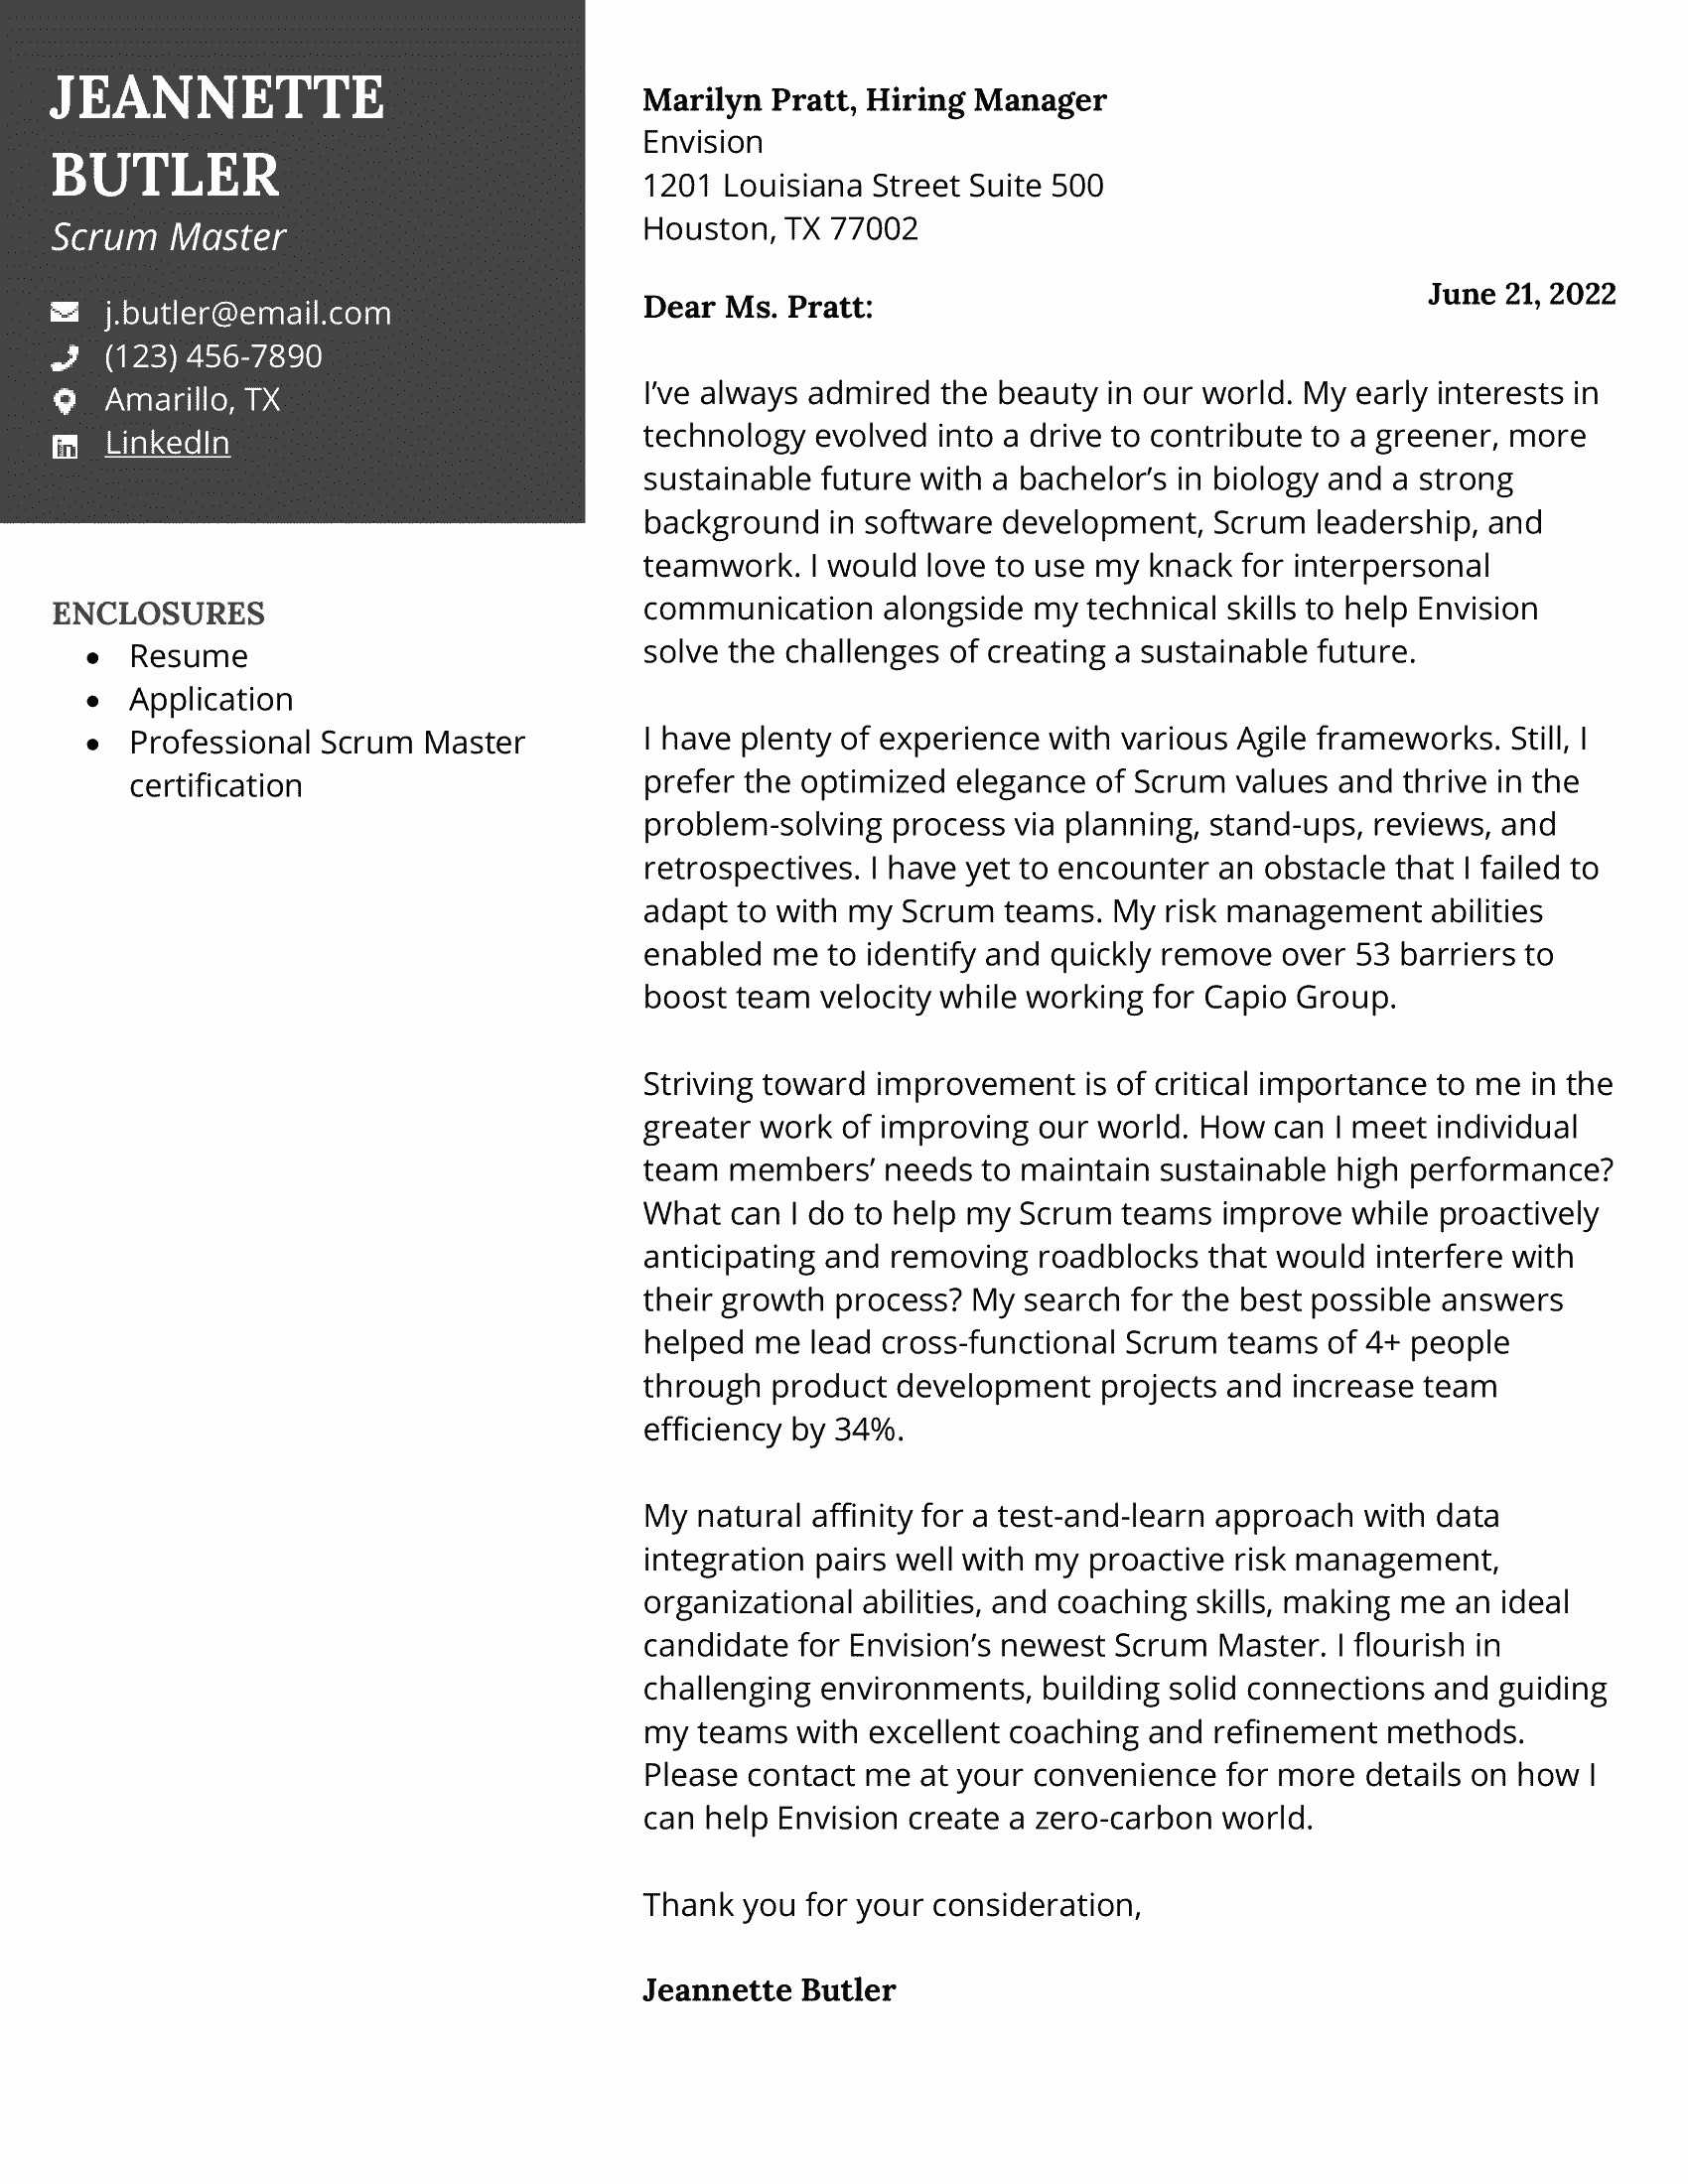 Scrum Master cover letter with black contact header